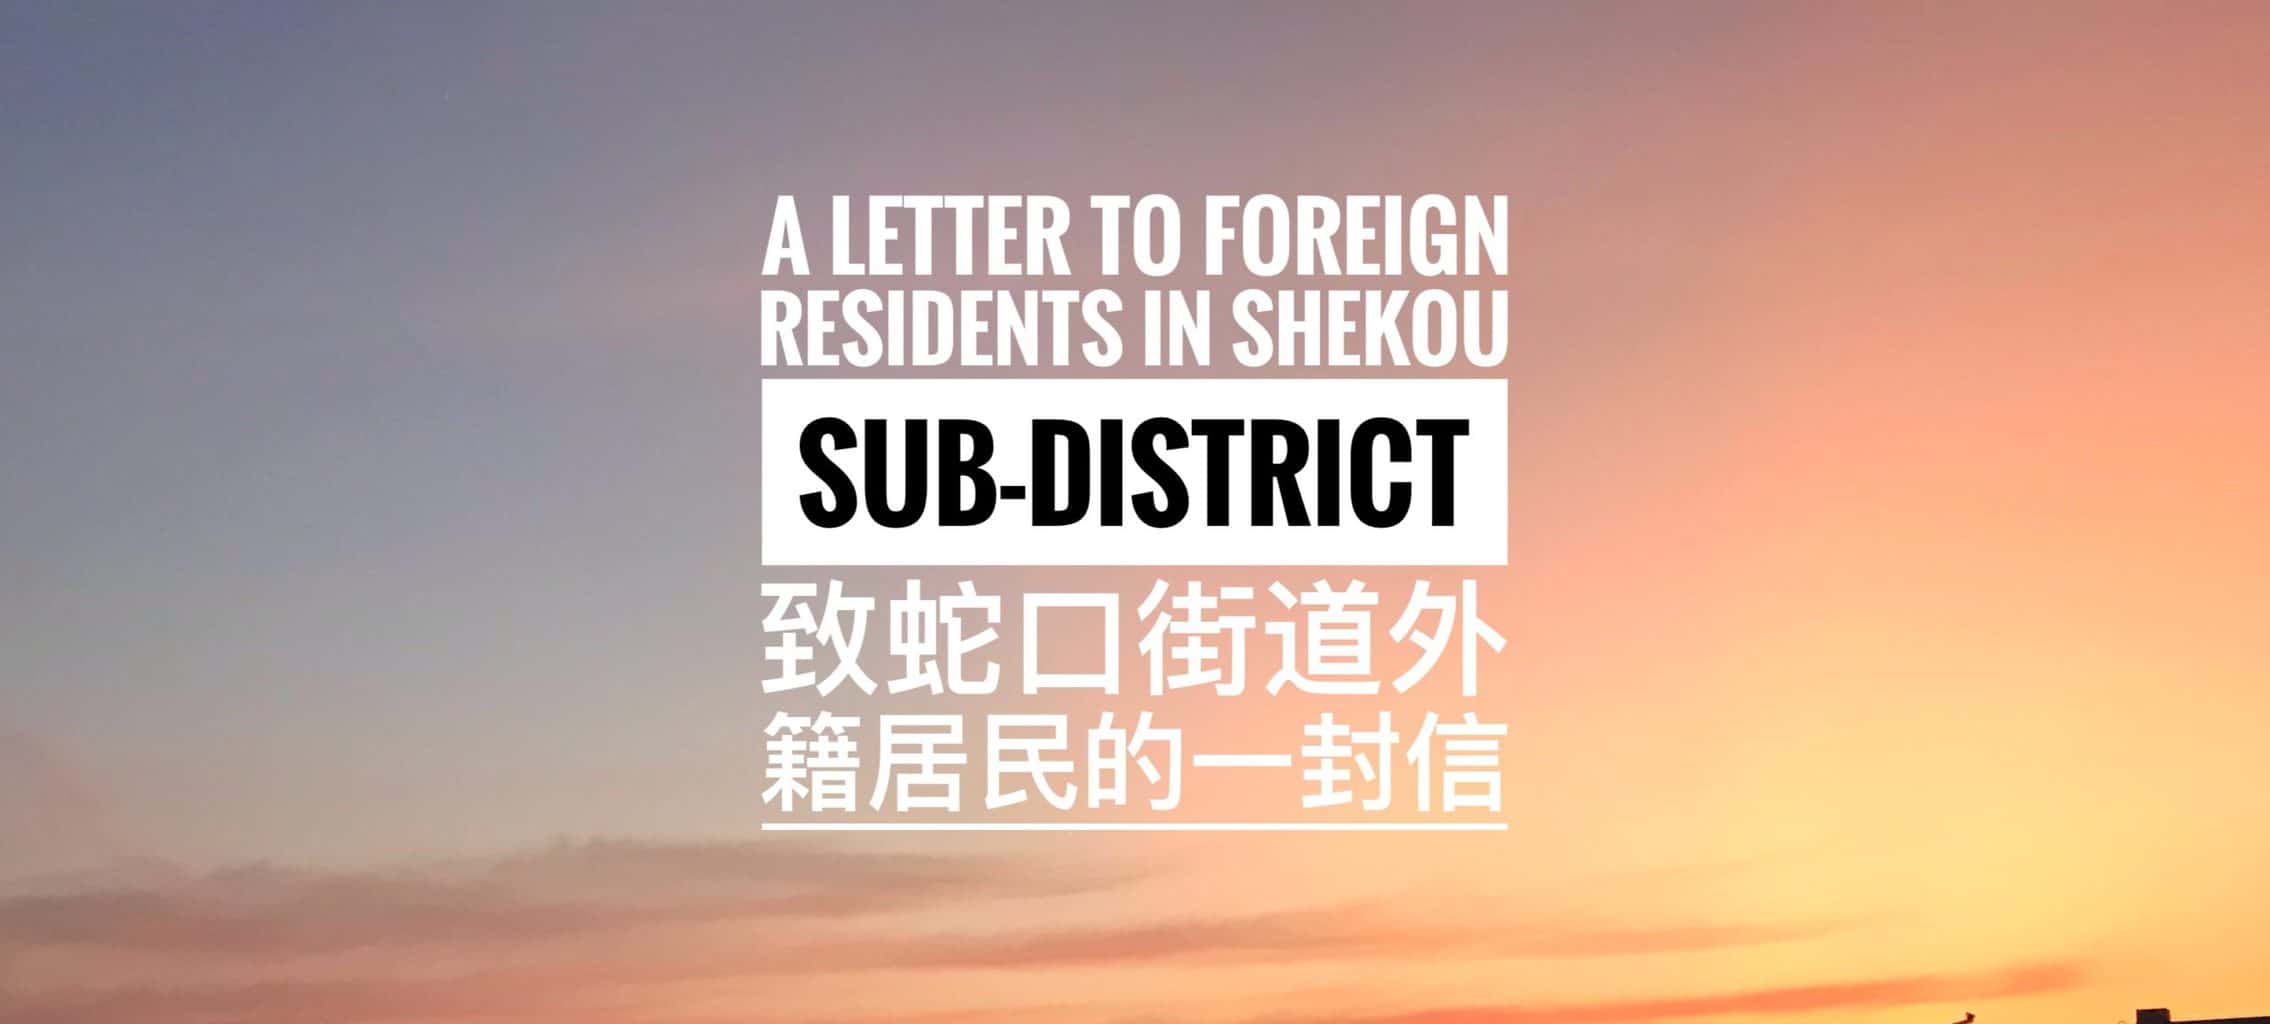 Featured image for “Shekou MSCE| A Letter to Foreign Residents in Shekou Sub-district”